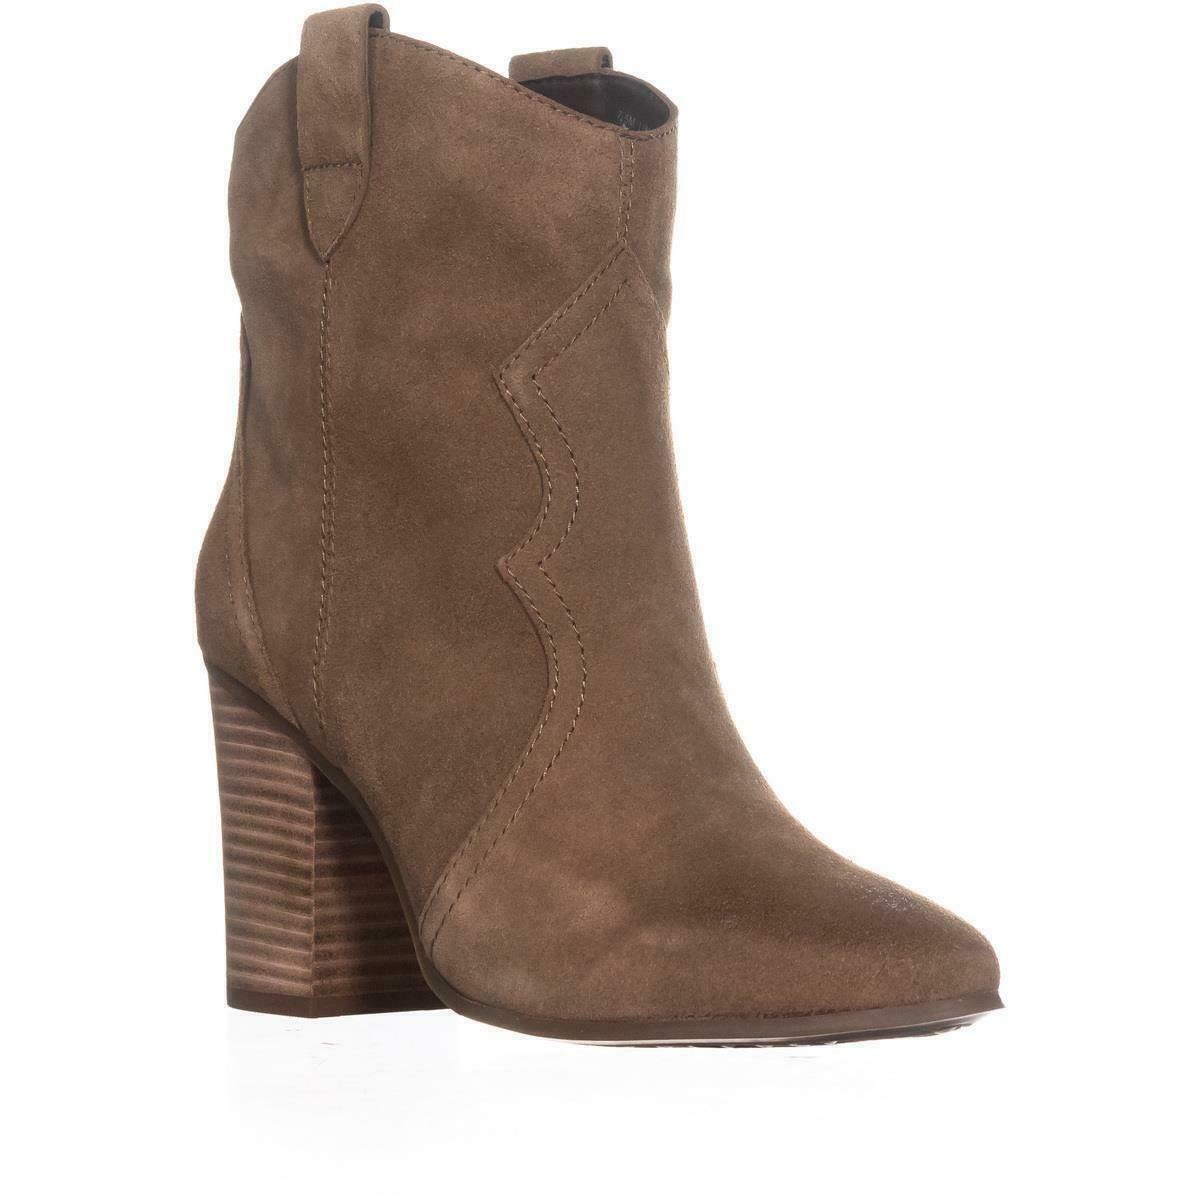 Aerosoles Lincoln Square Western Ankle Boots, Tan - Boots